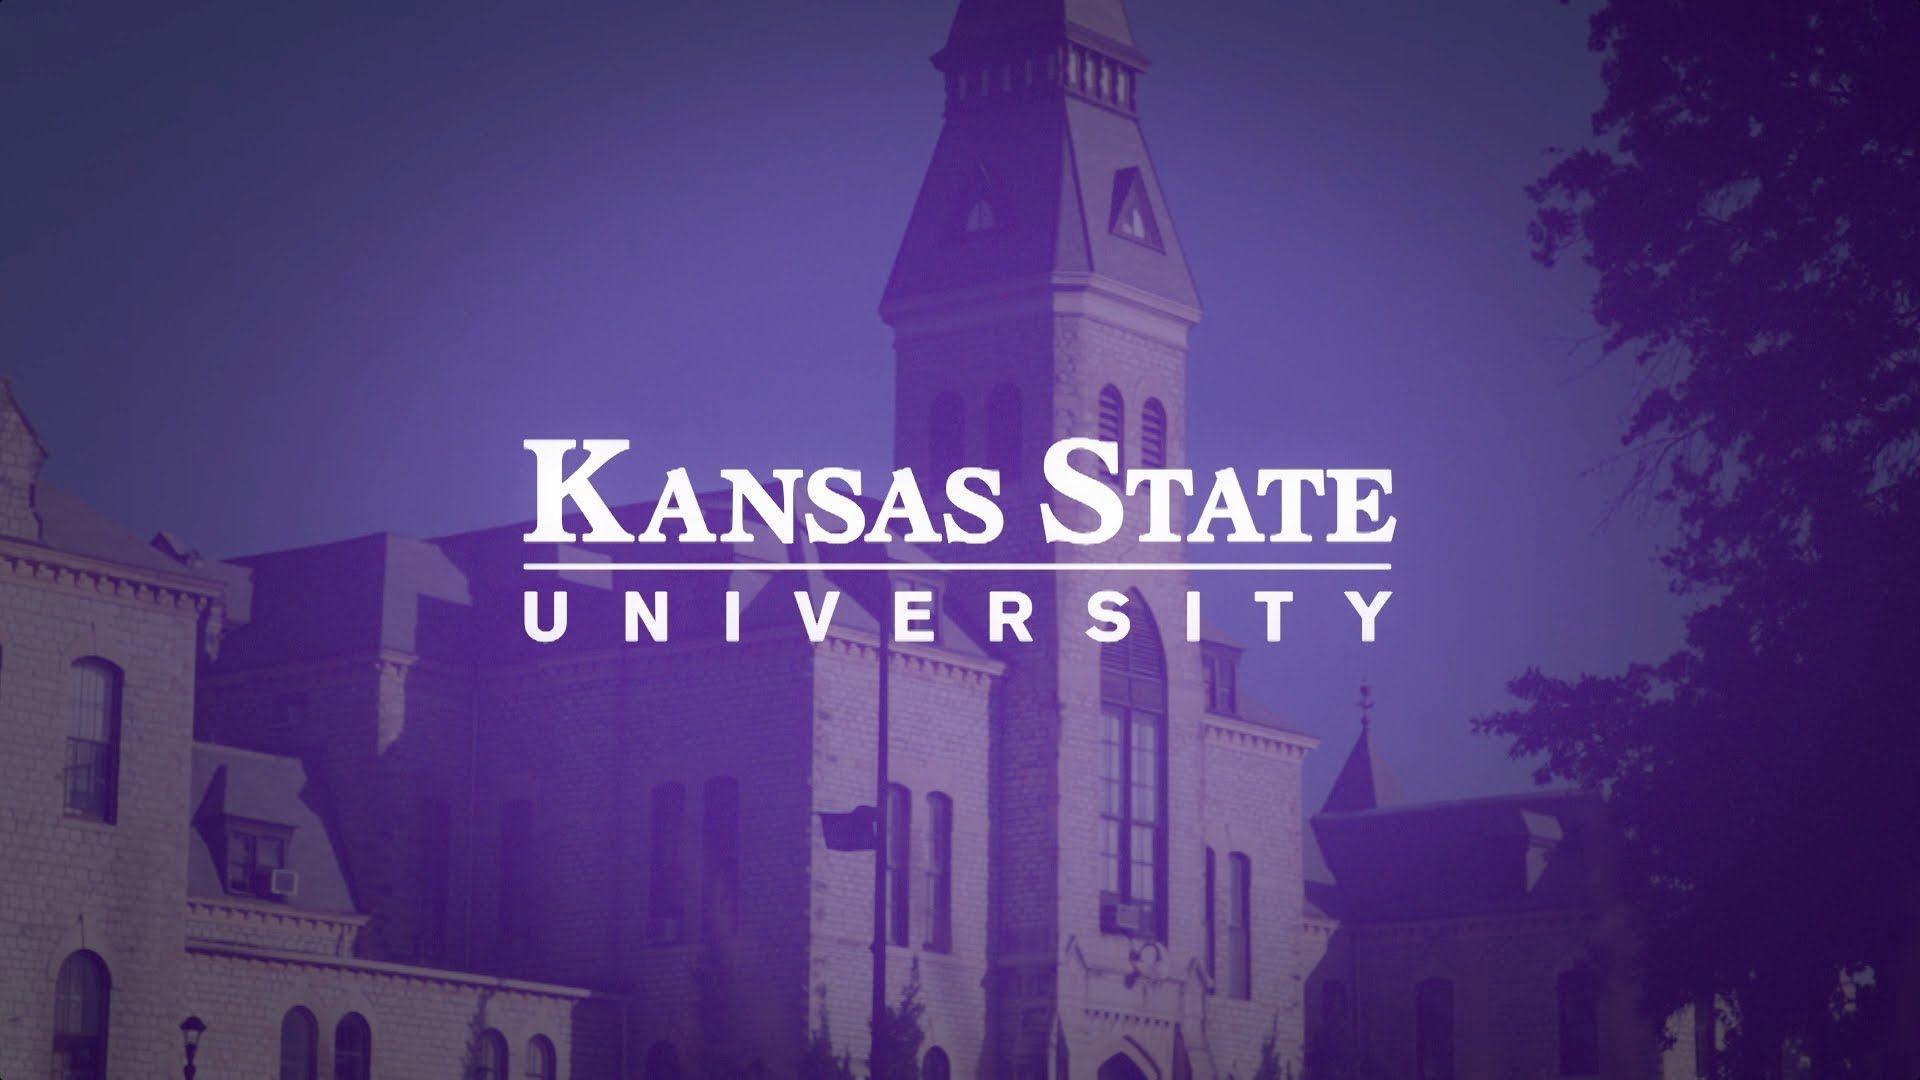 Become a part of Kansas State University